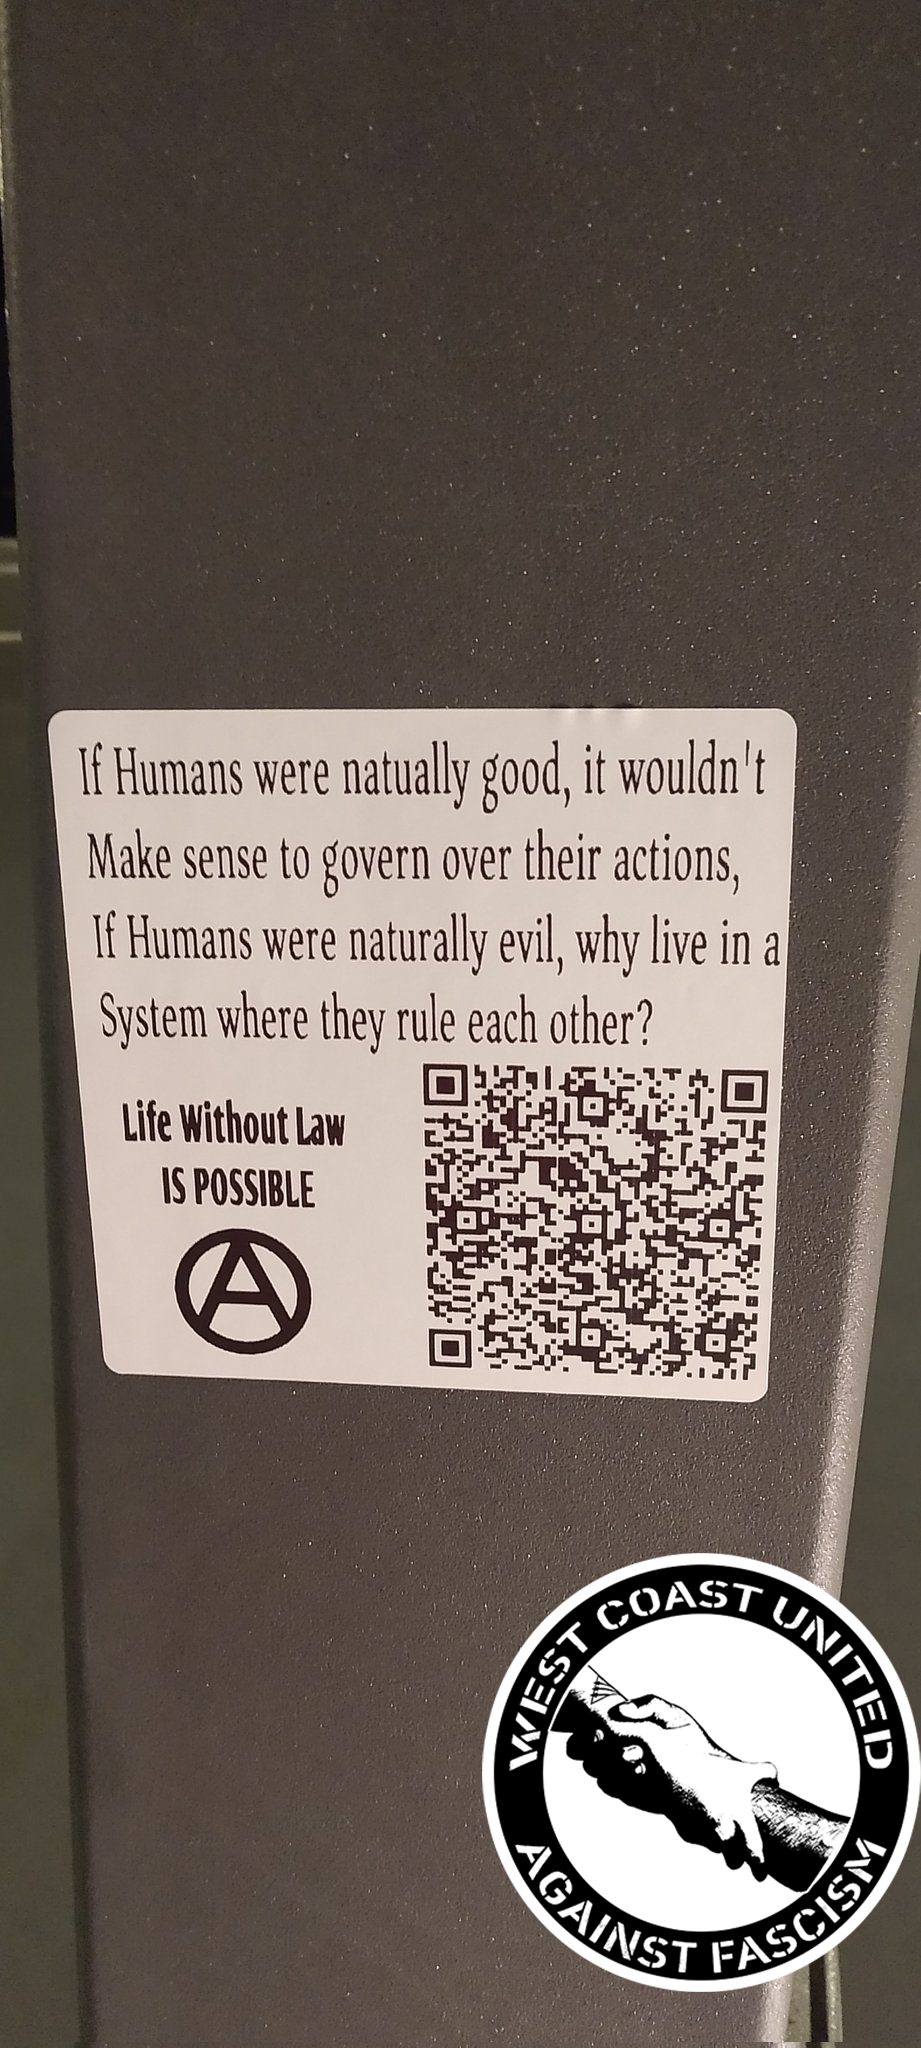 A square sticker on a variousu object reads "If Humans were naturally good, it wouldn't Make sense to govern over their actions, if Humans were naturally evil, why live in a system where they rule each other? Life without Law is possible." It includes an anarchist "circle a" and a QR code.